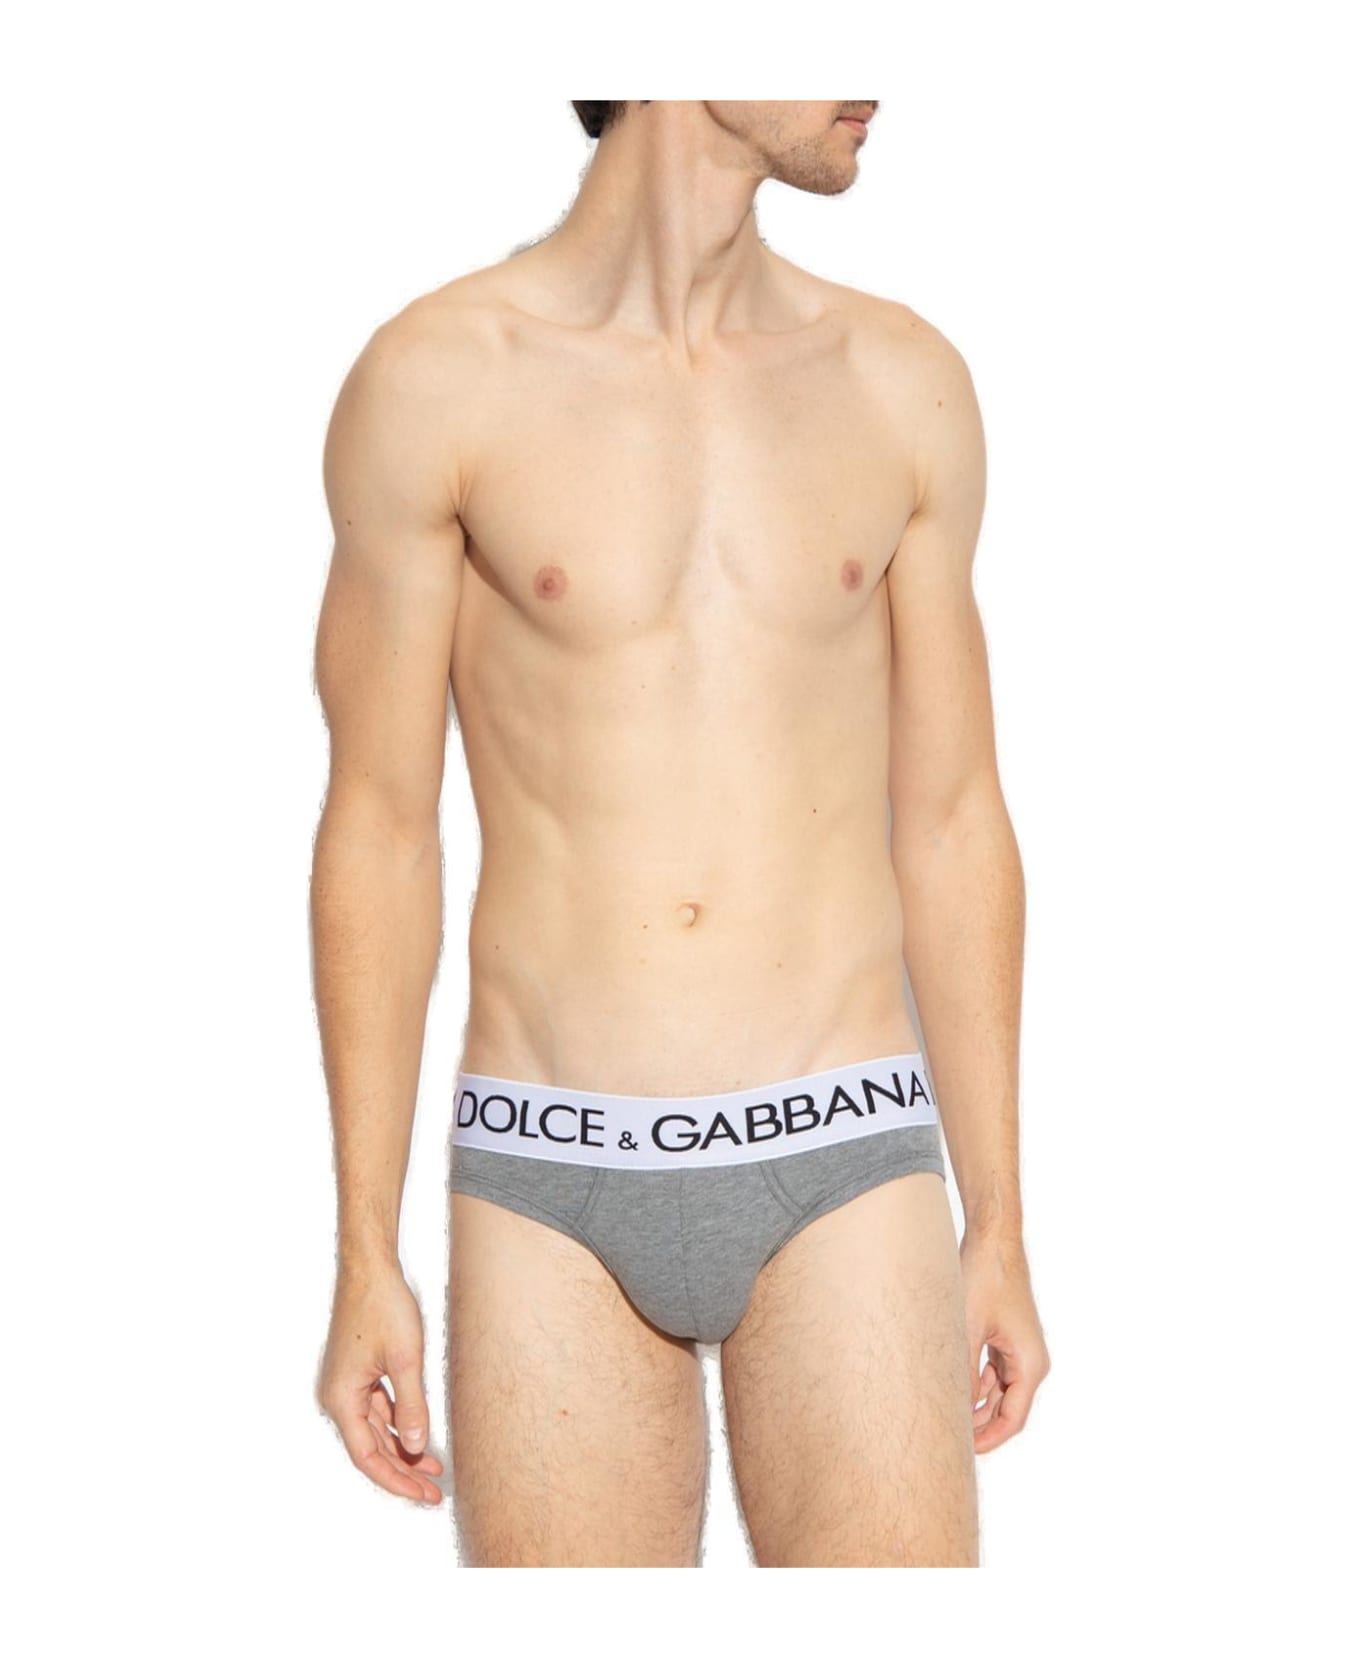 Dolce & Gabbana Two Way Stretched Mid-rise Briefs - MELANGE GREY